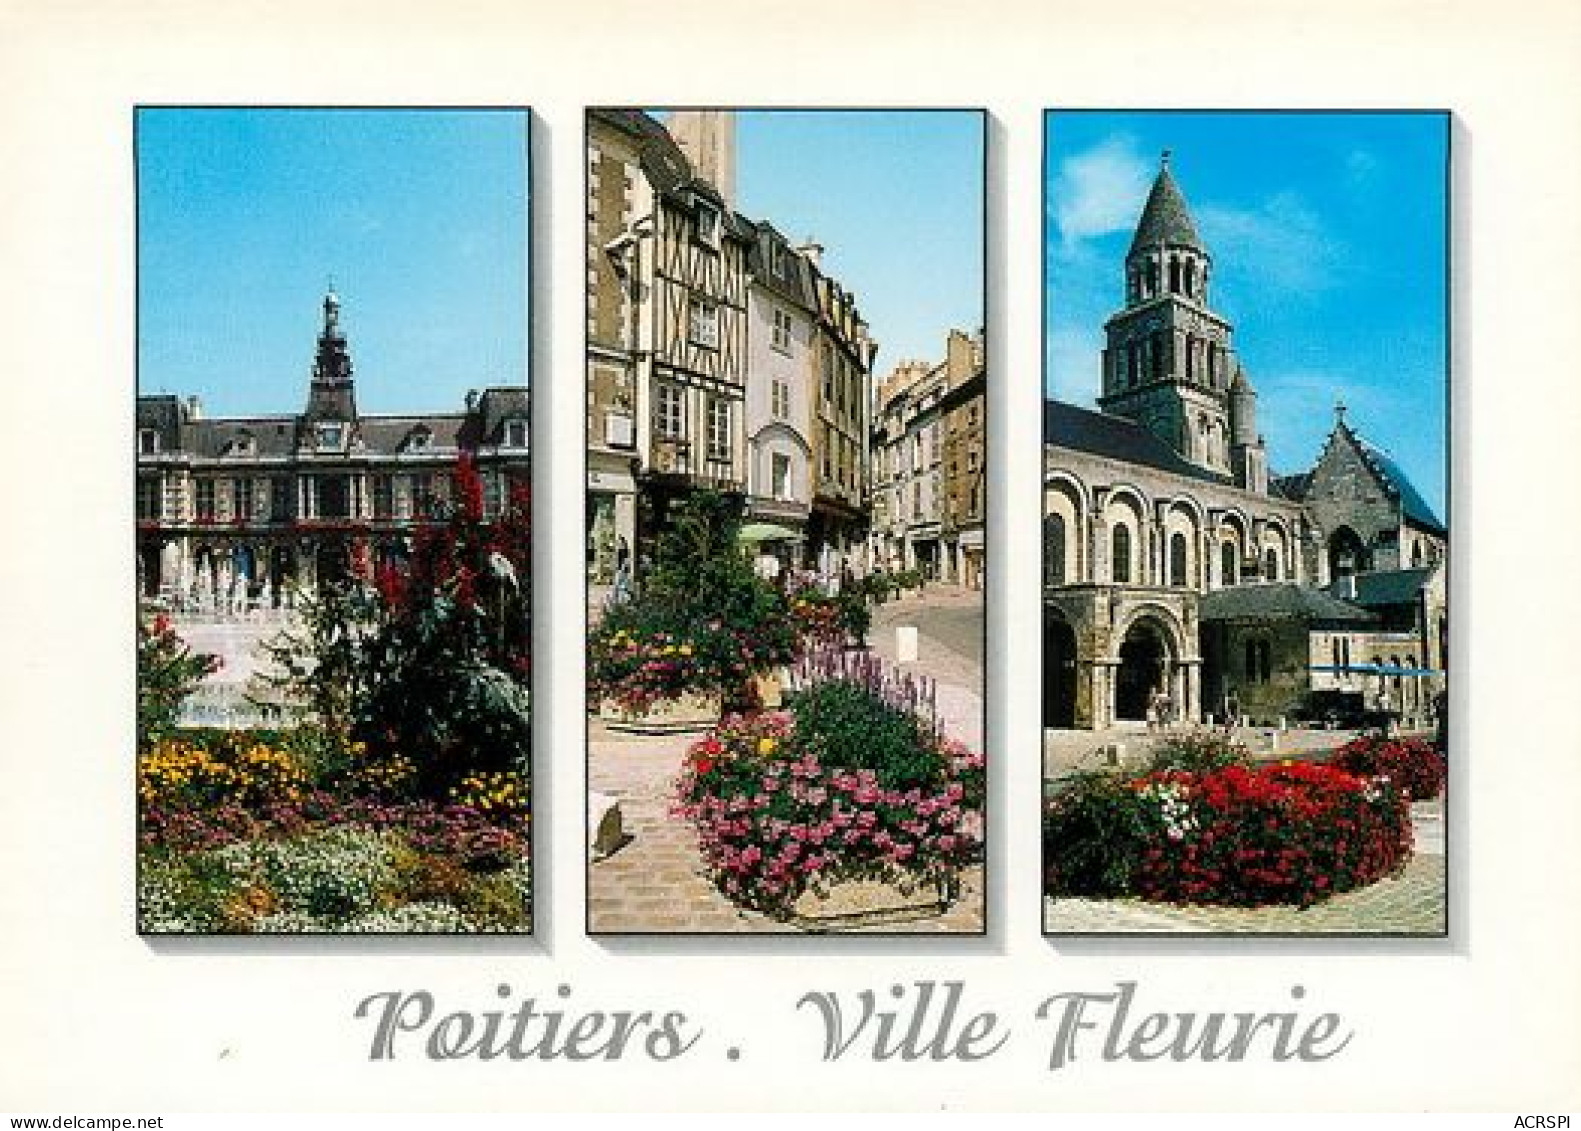  POITIERS  Les Rues Pietonnes  13   (scan Recto-verso)MA2166Bis - Poitiers